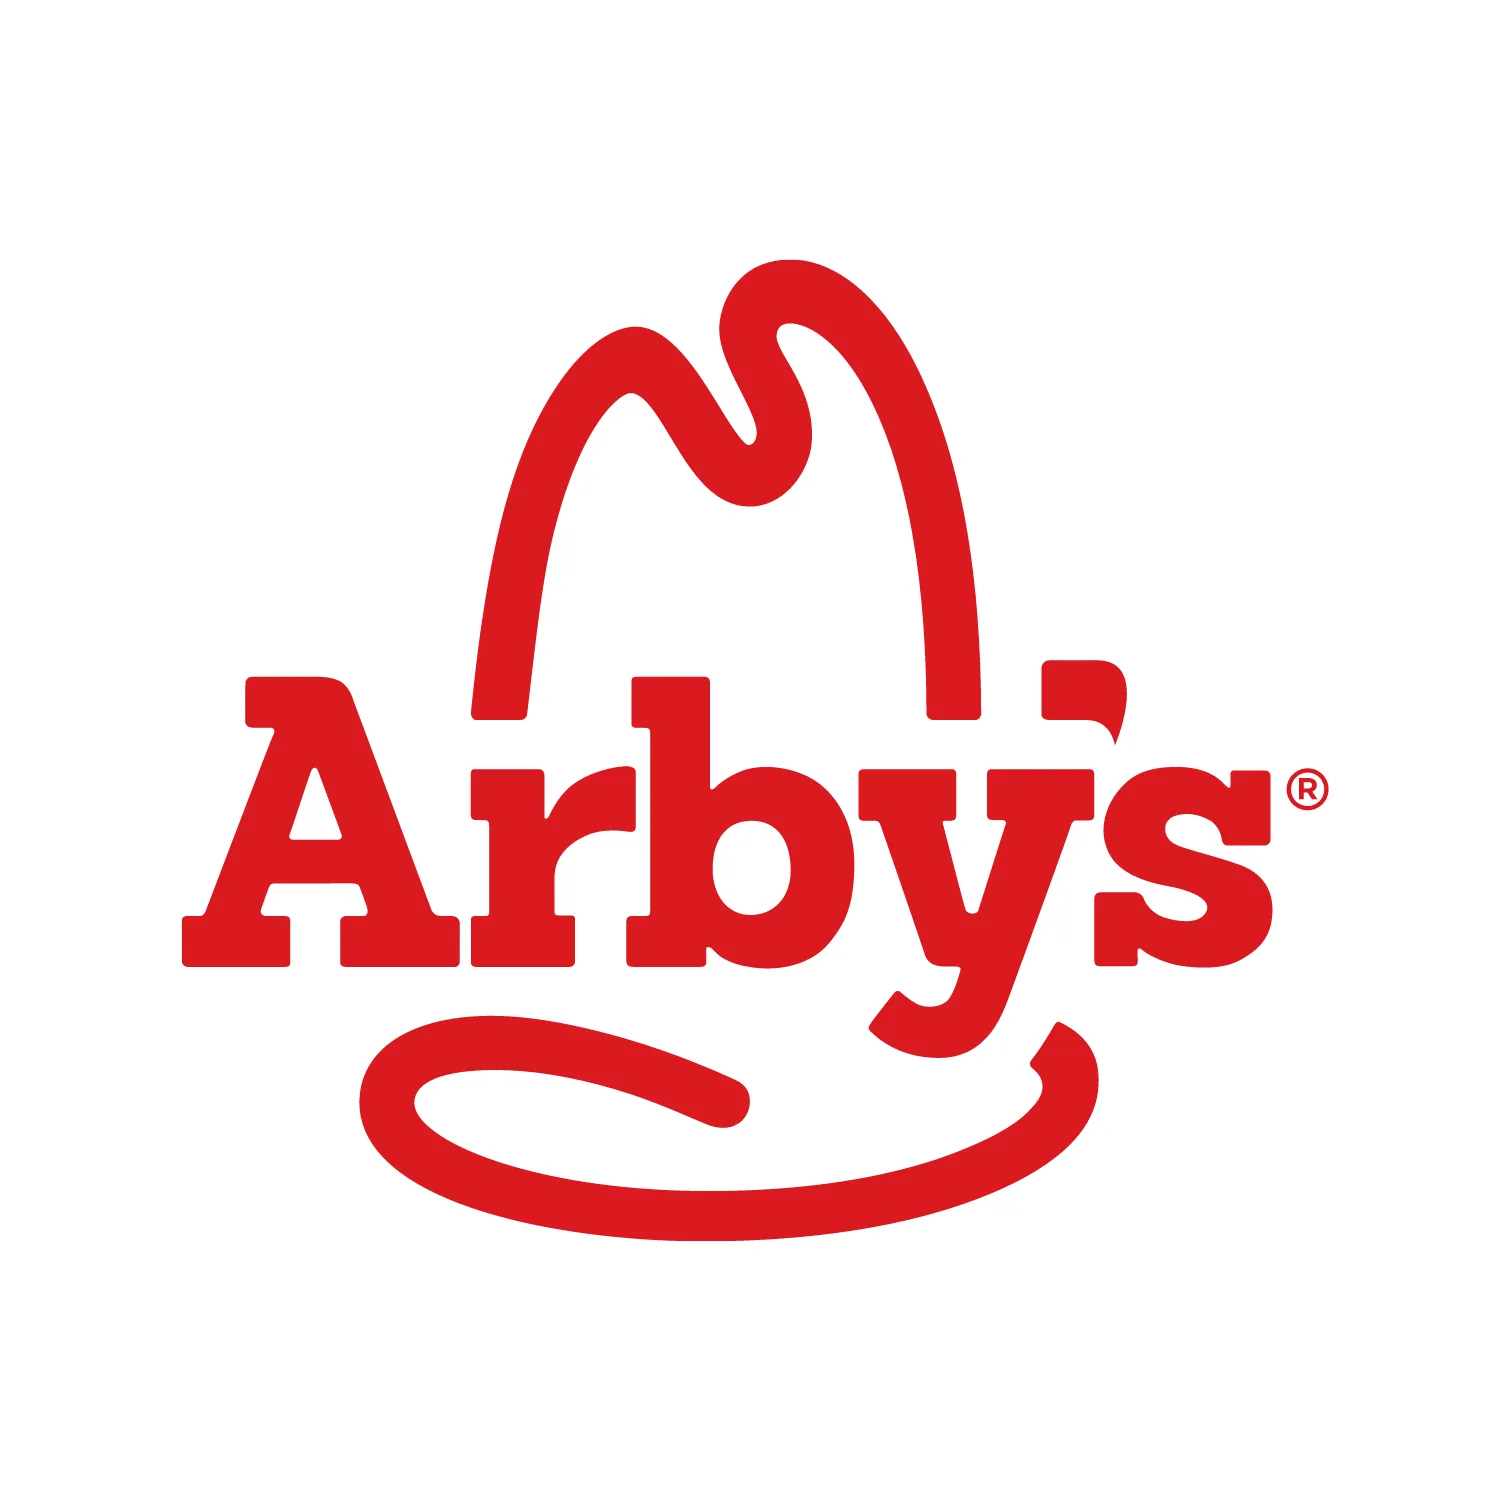 Database of Arby’s Locations in the United States